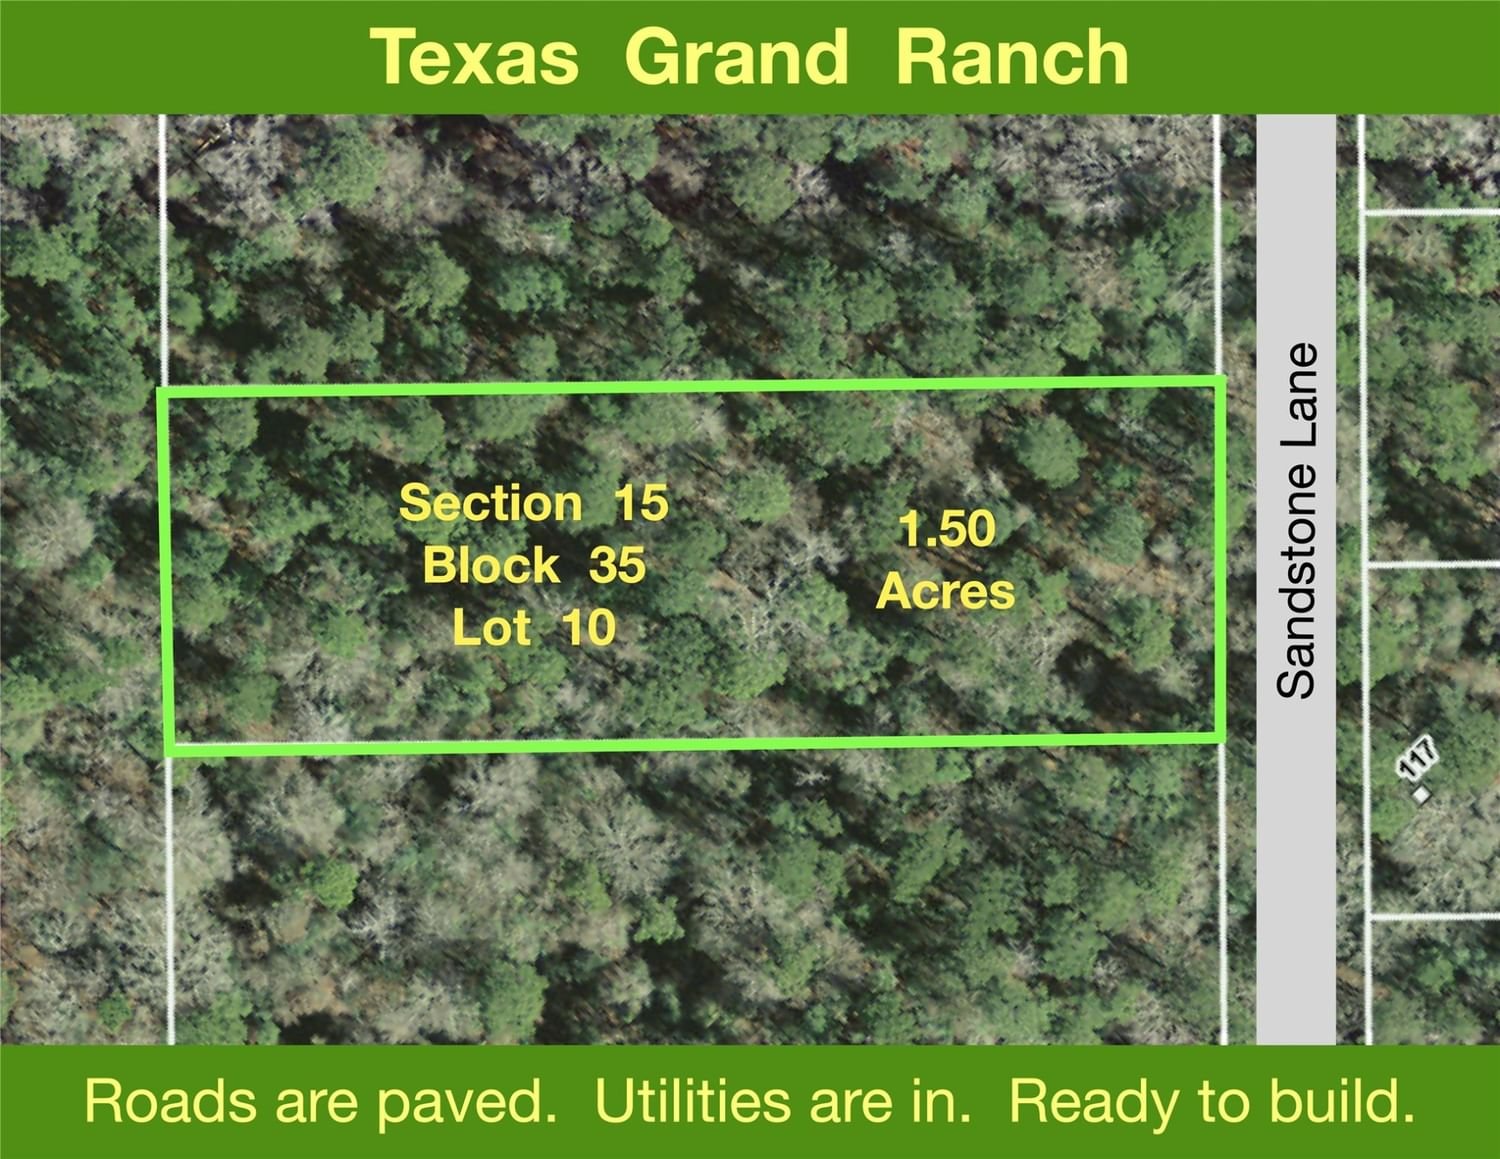 Real estate property located at 15-35-10 Sandstone, Walker, Texas Grand Ranch, Huntsville, TX, US